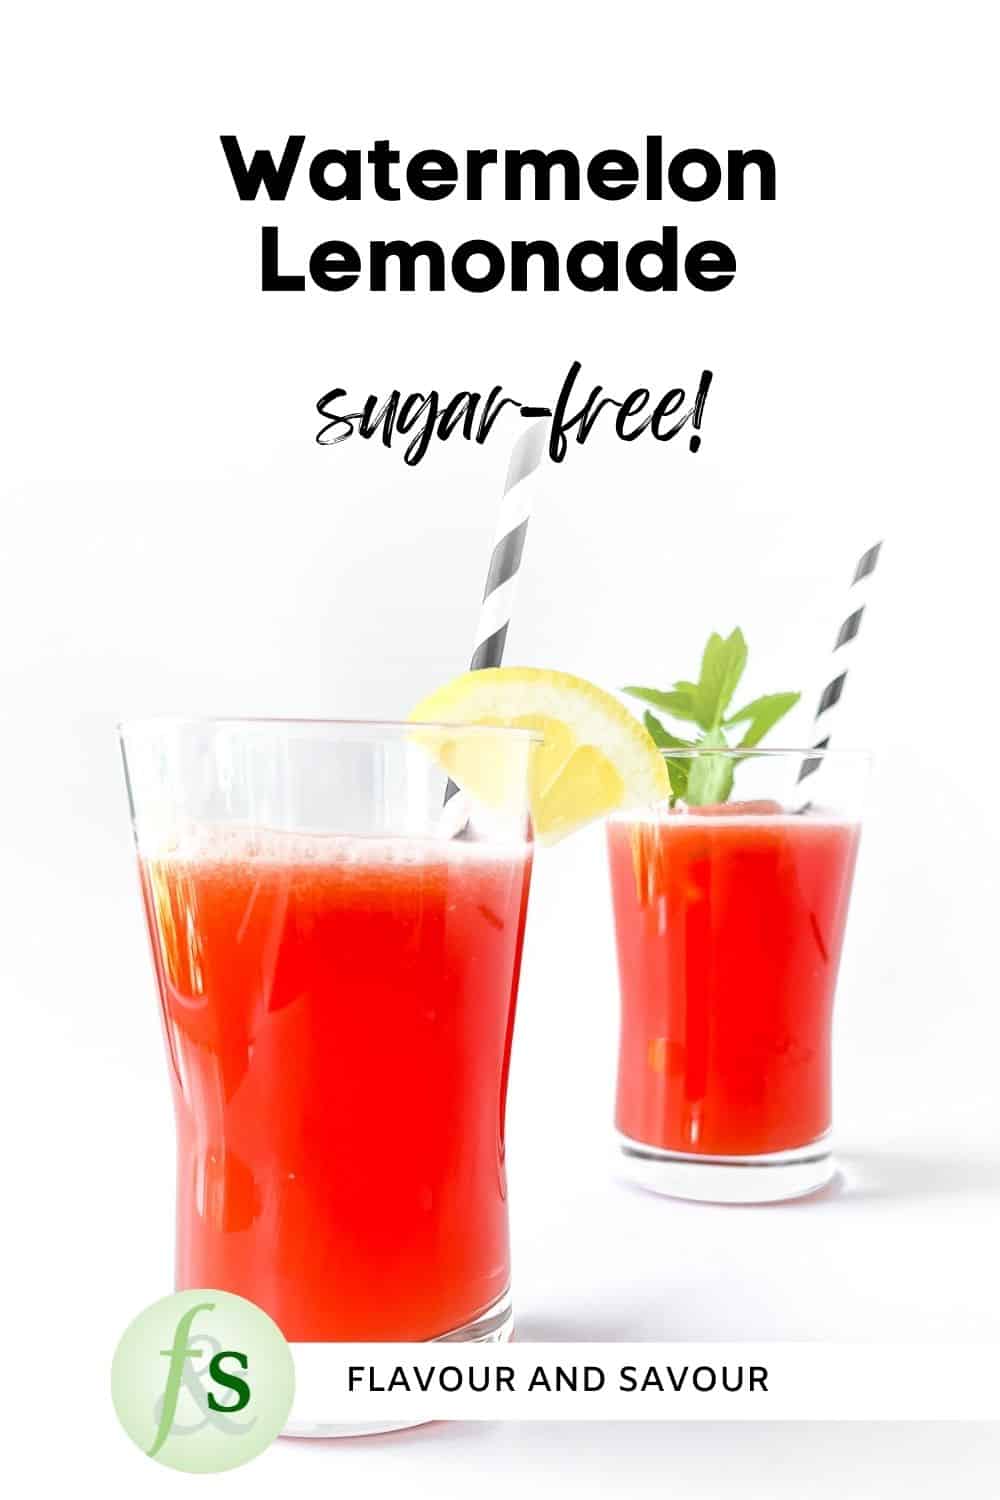 Image with text overlay for sugar-free watermelon lemonade.